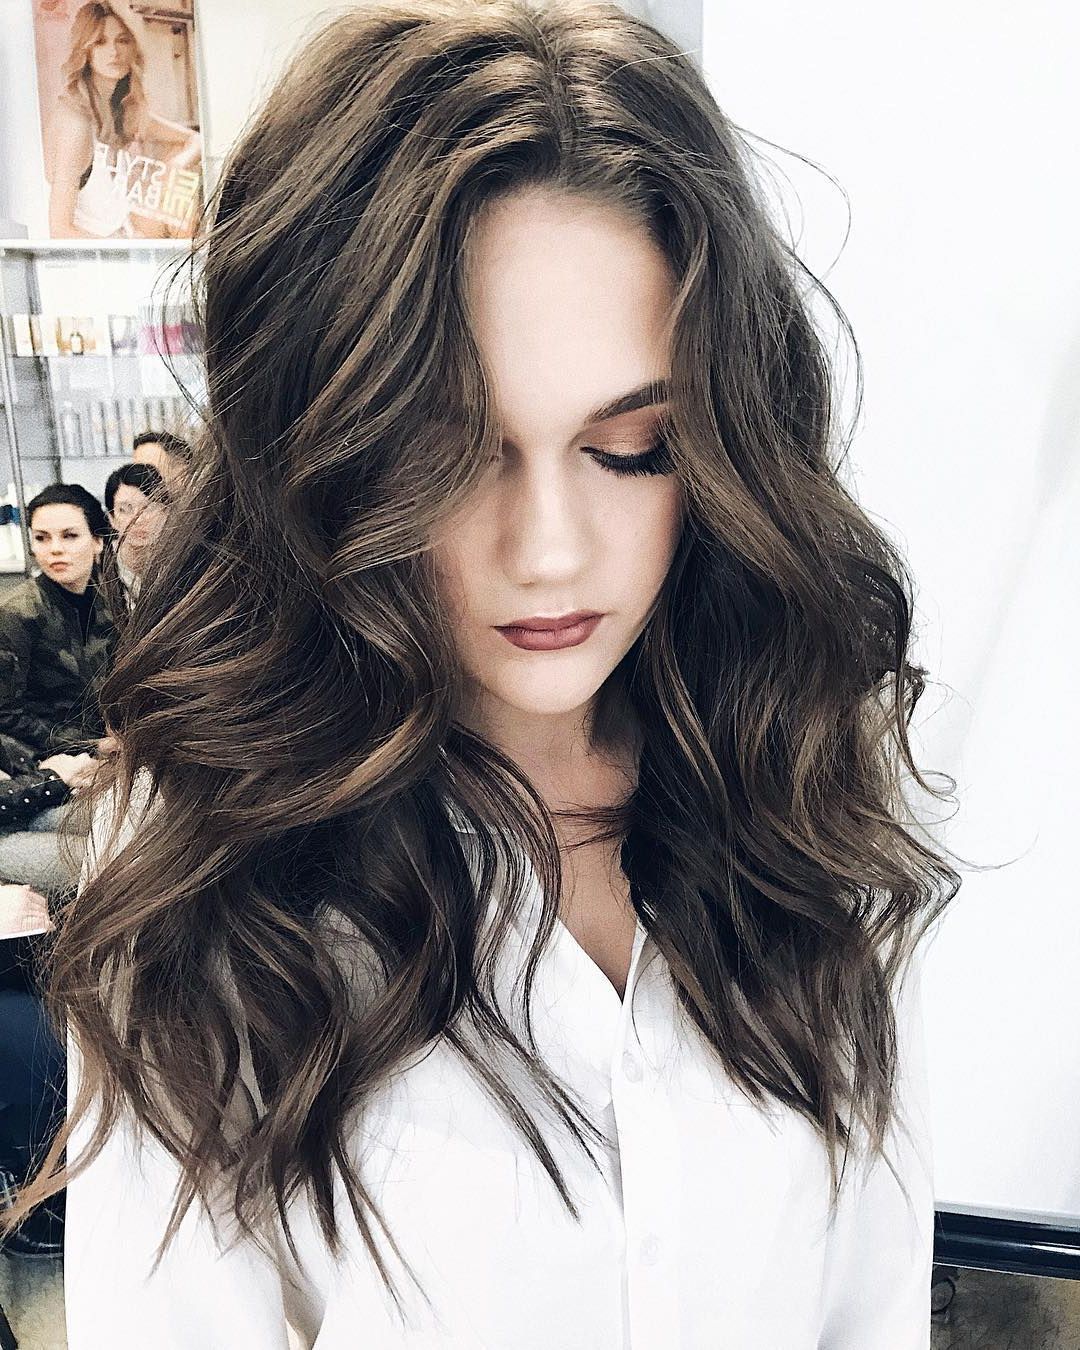 10 Gorgeous Long Wavy Perm Hairstyles, Long Hair Styles 2019 Inside Widely Used Messy Loose Curls Long Hairstyles With Voluminous Bangs (View 6 of 20)